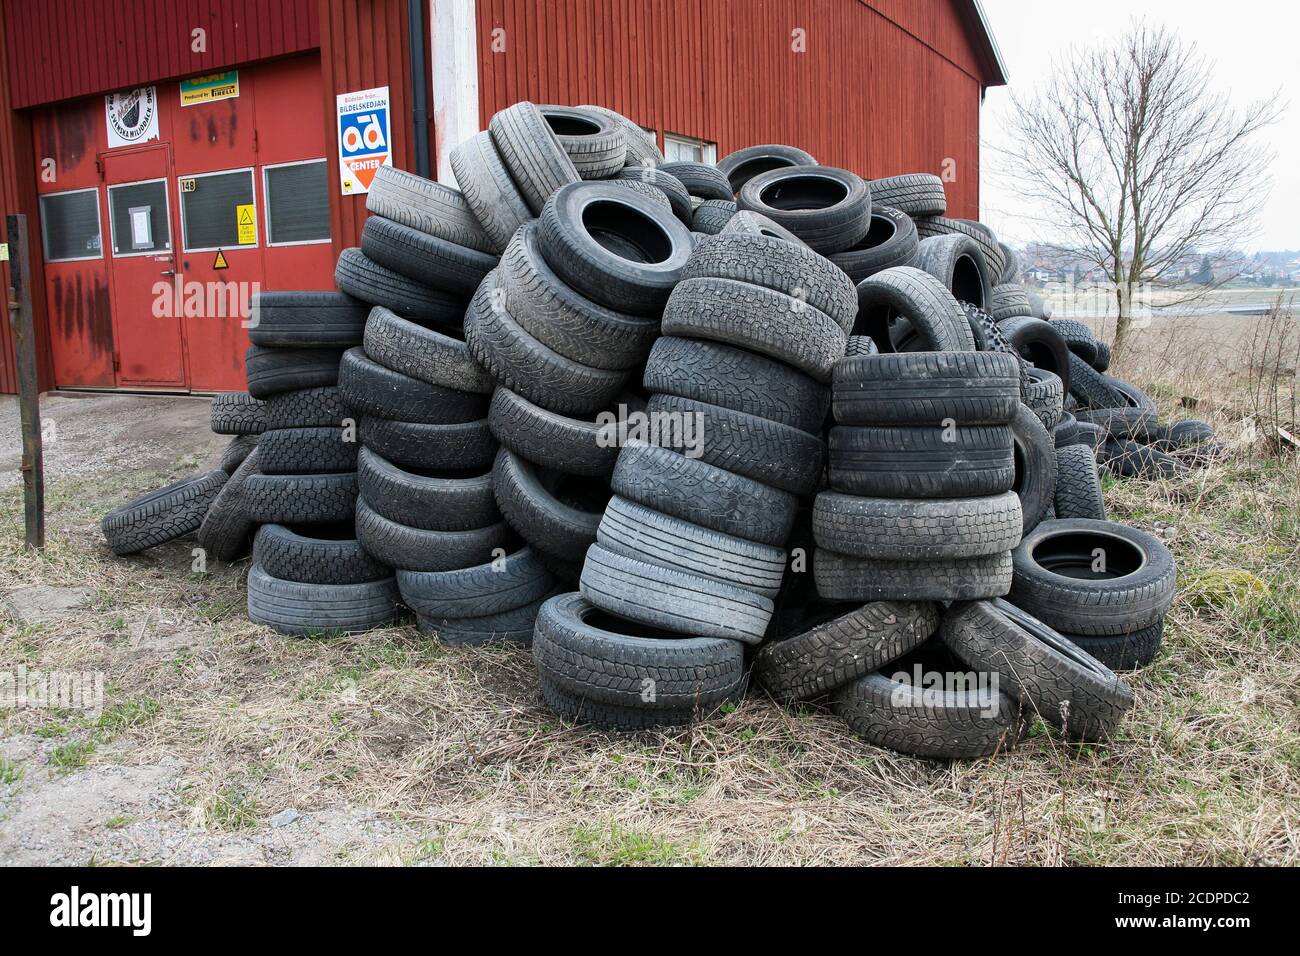 USED CAR TIRES piled up outside the workshop Stock Photo